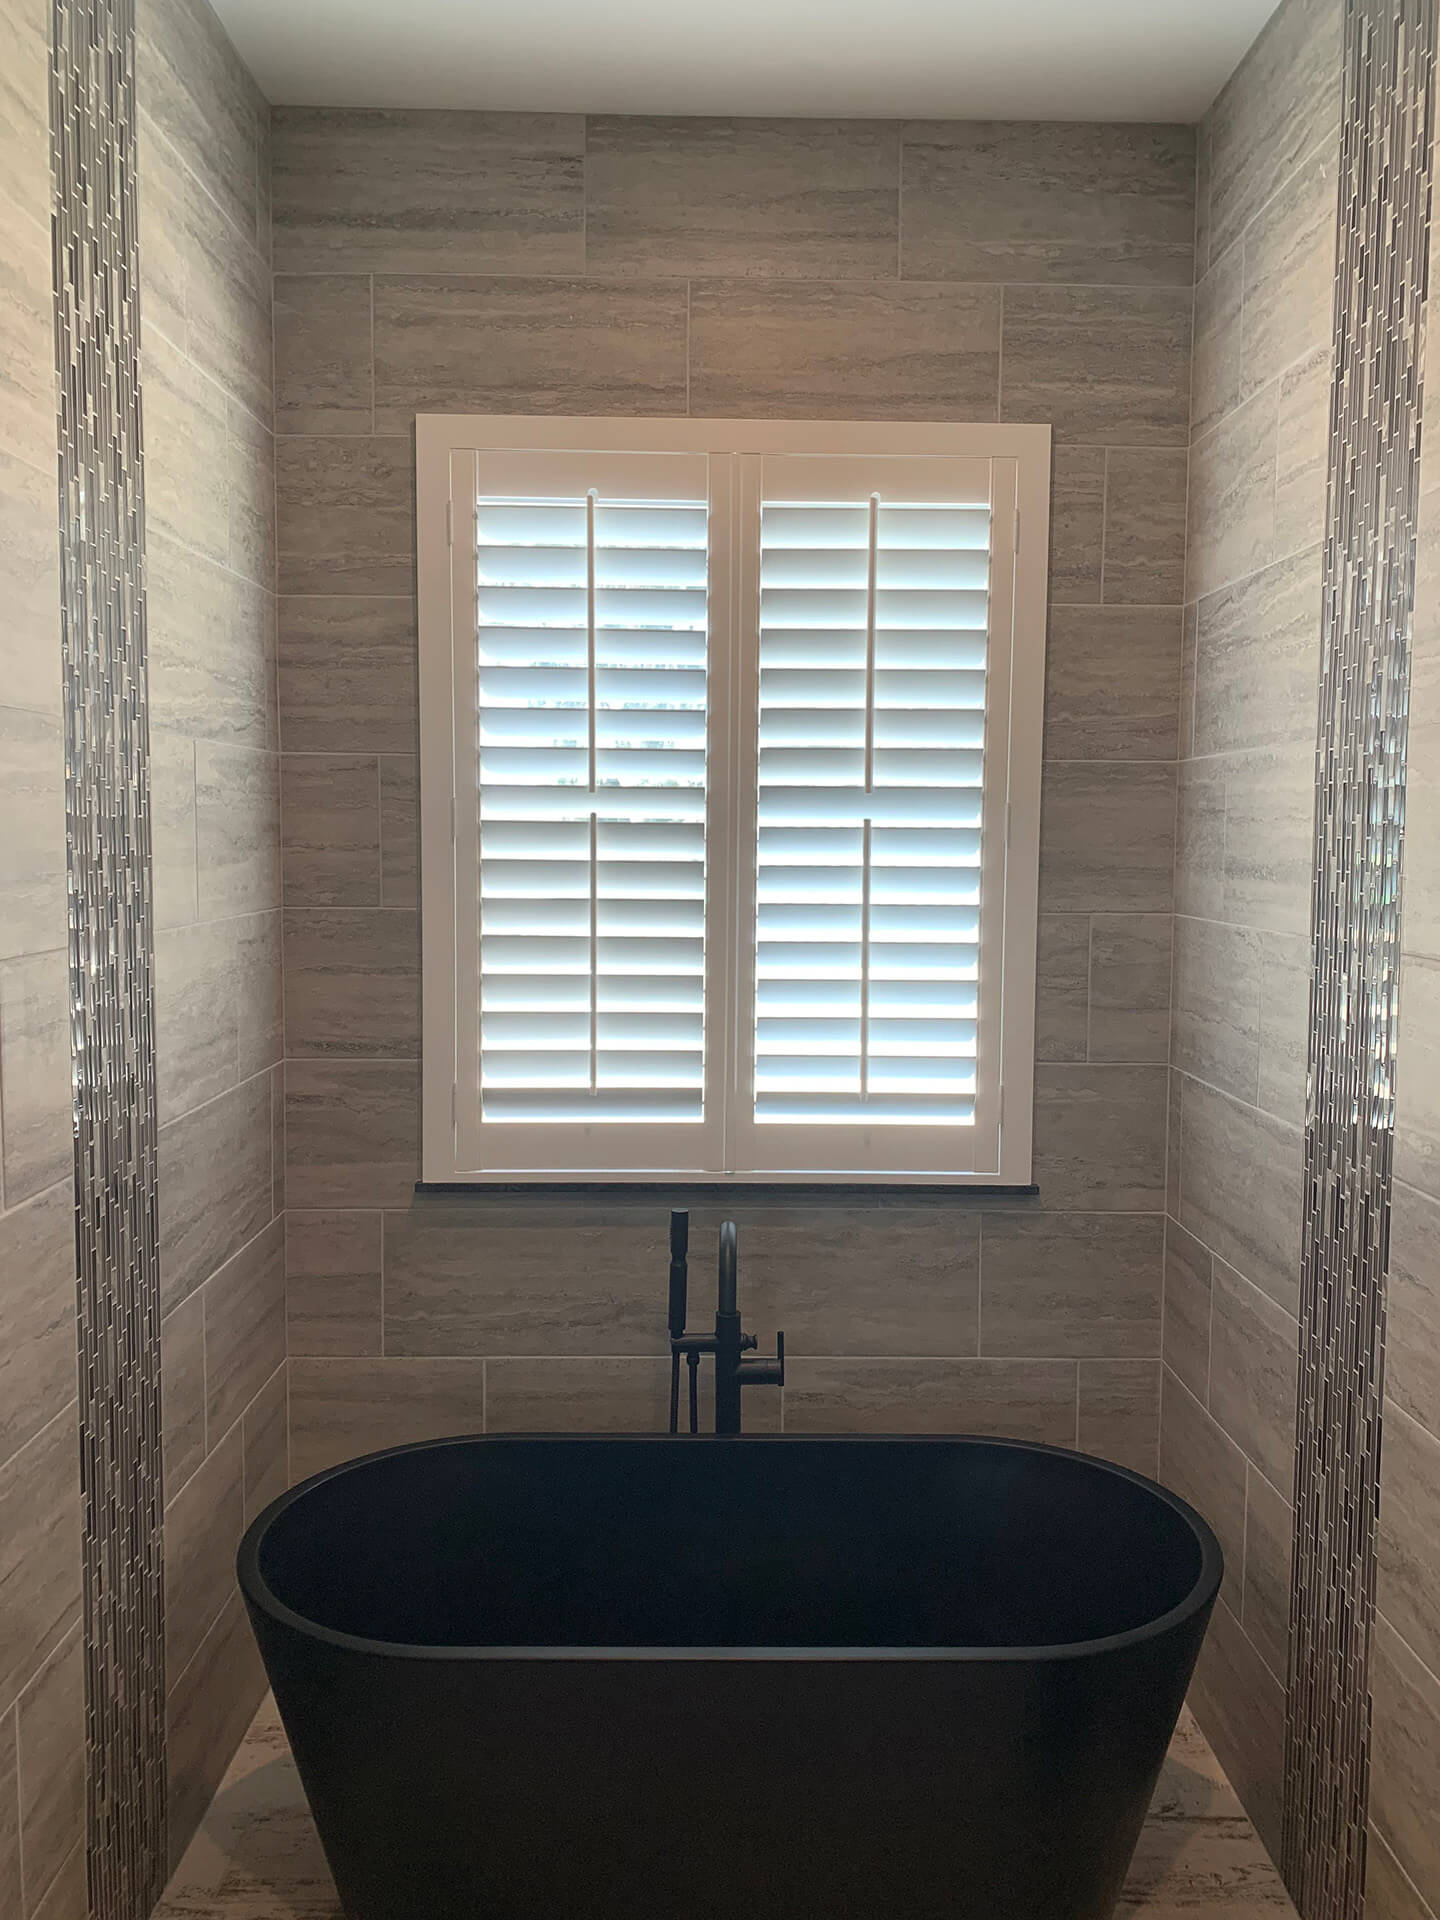 A black bathtub with a window above it covered by shutters.